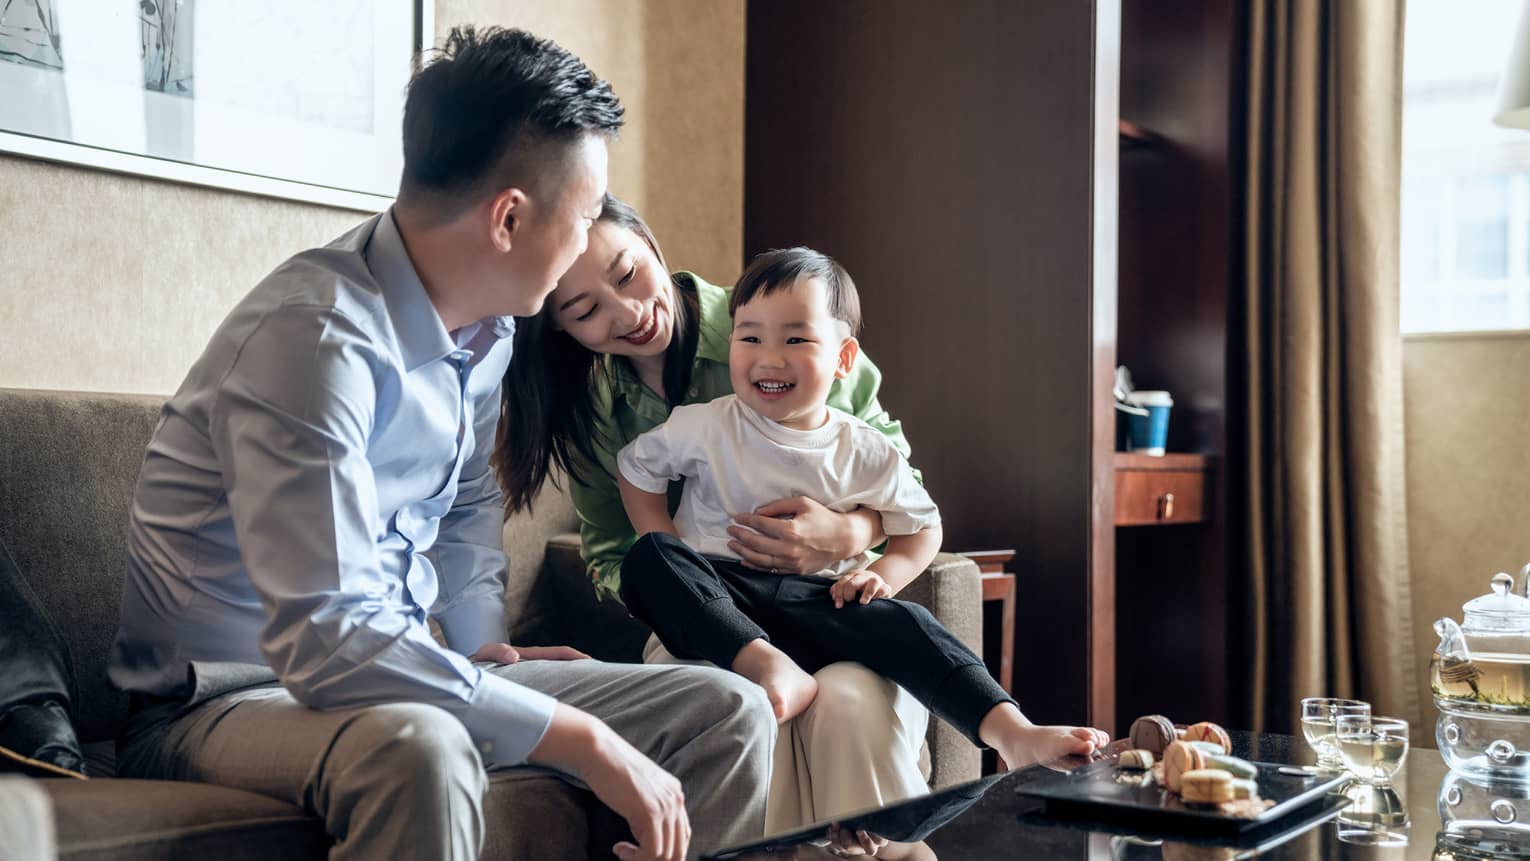 Laughing couple sits with their toddler son, tea and sweets on the coffee table in front of them